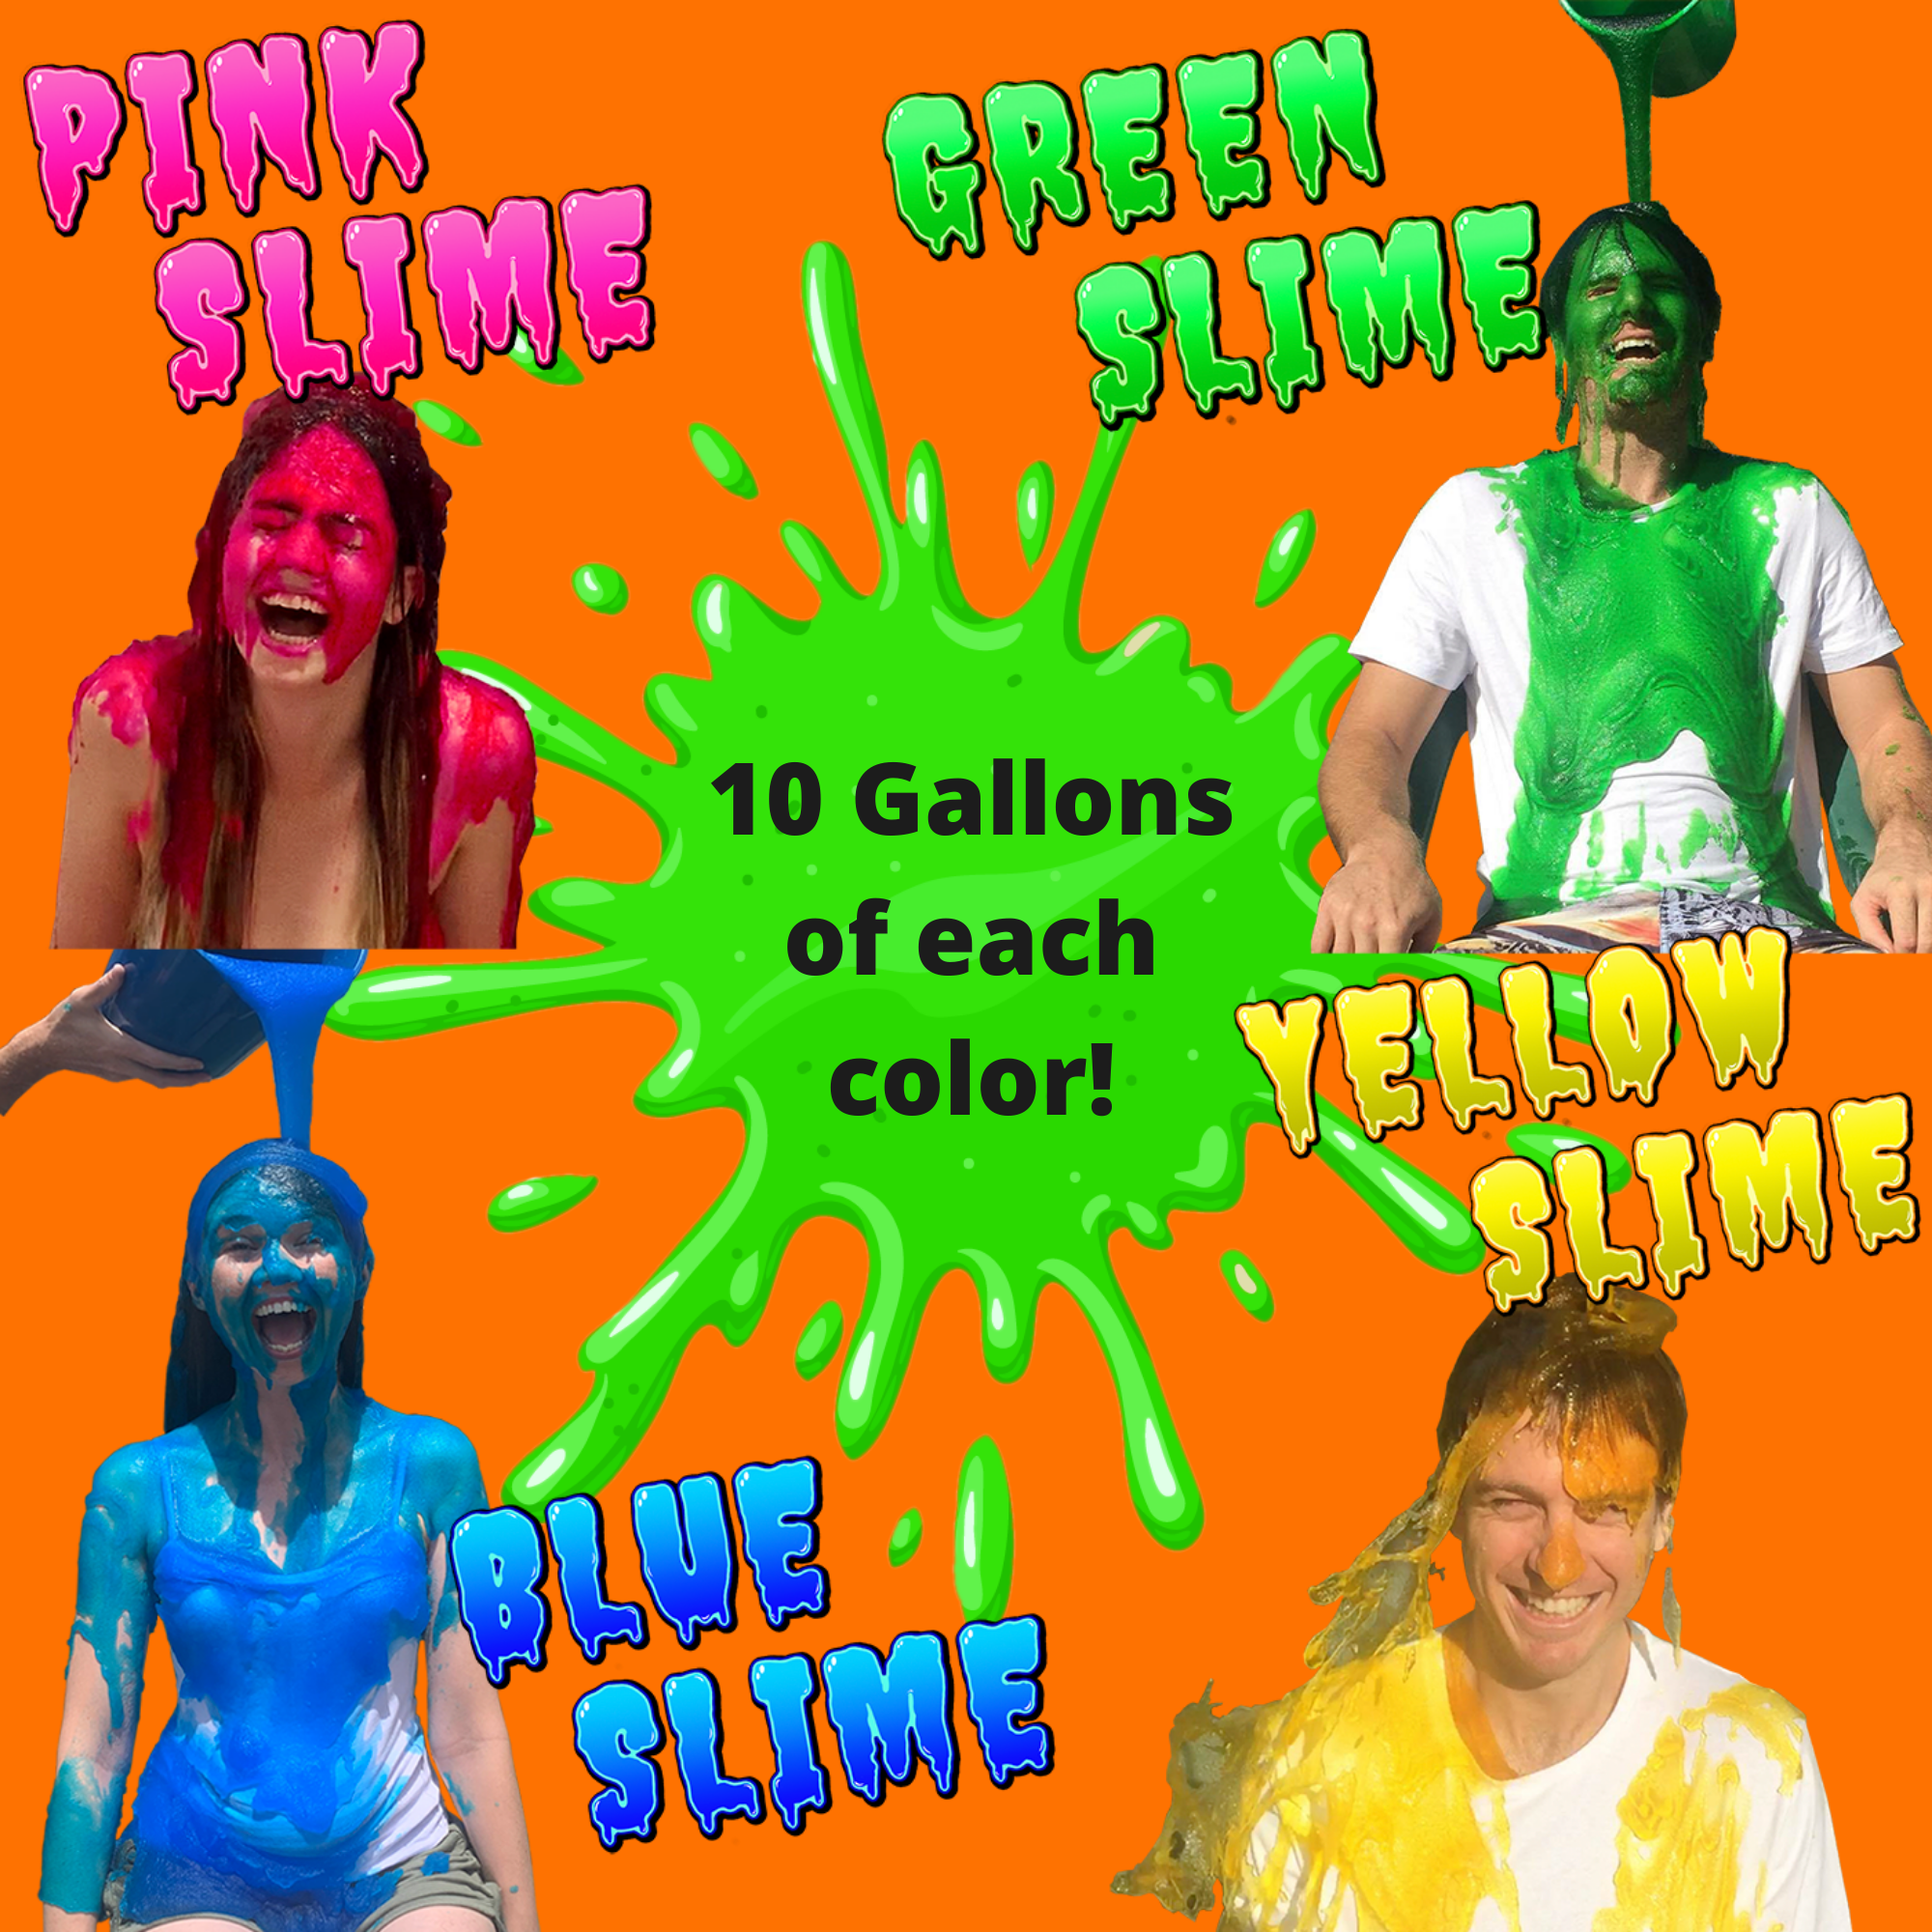 https://partygoat.com/cdn/shop/products/Slime-powder-just-add-water-buckets-of-slime-gallons-of-green-slime-bulk-slime-supplies_24dbf96d-0828-4bfb-997d-c8ec106dc197.png?v=1647844718